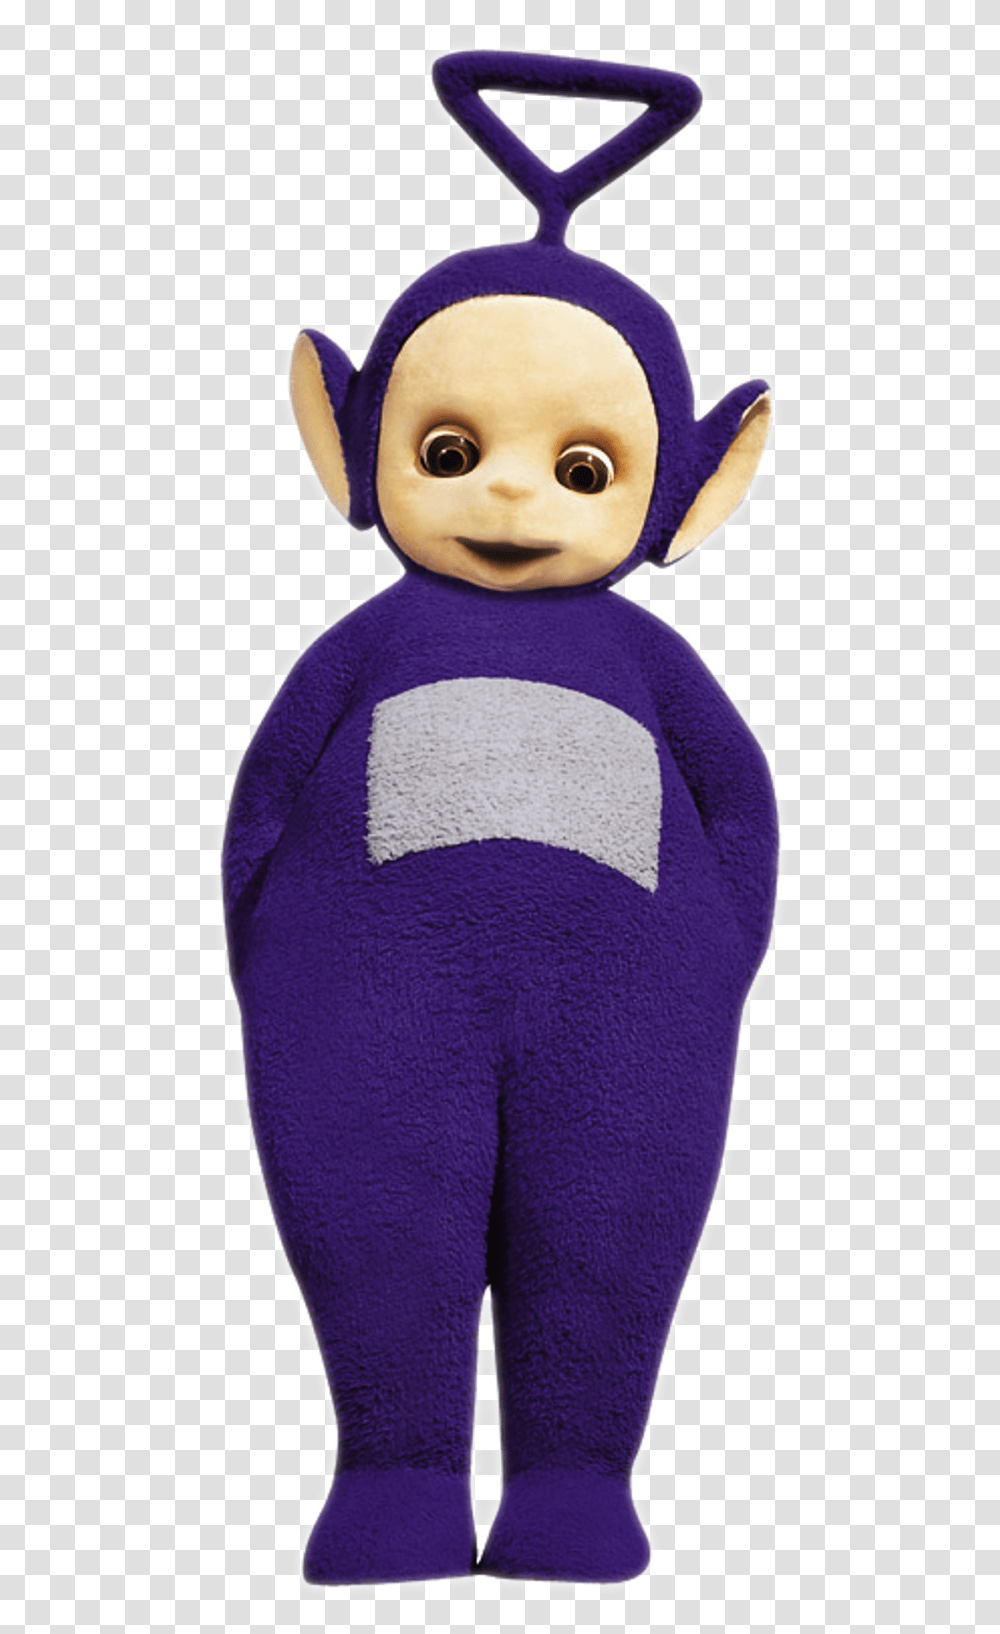 Teletubby Teletubbies, Clothing, Apparel, Toy, Plush Transparent Png